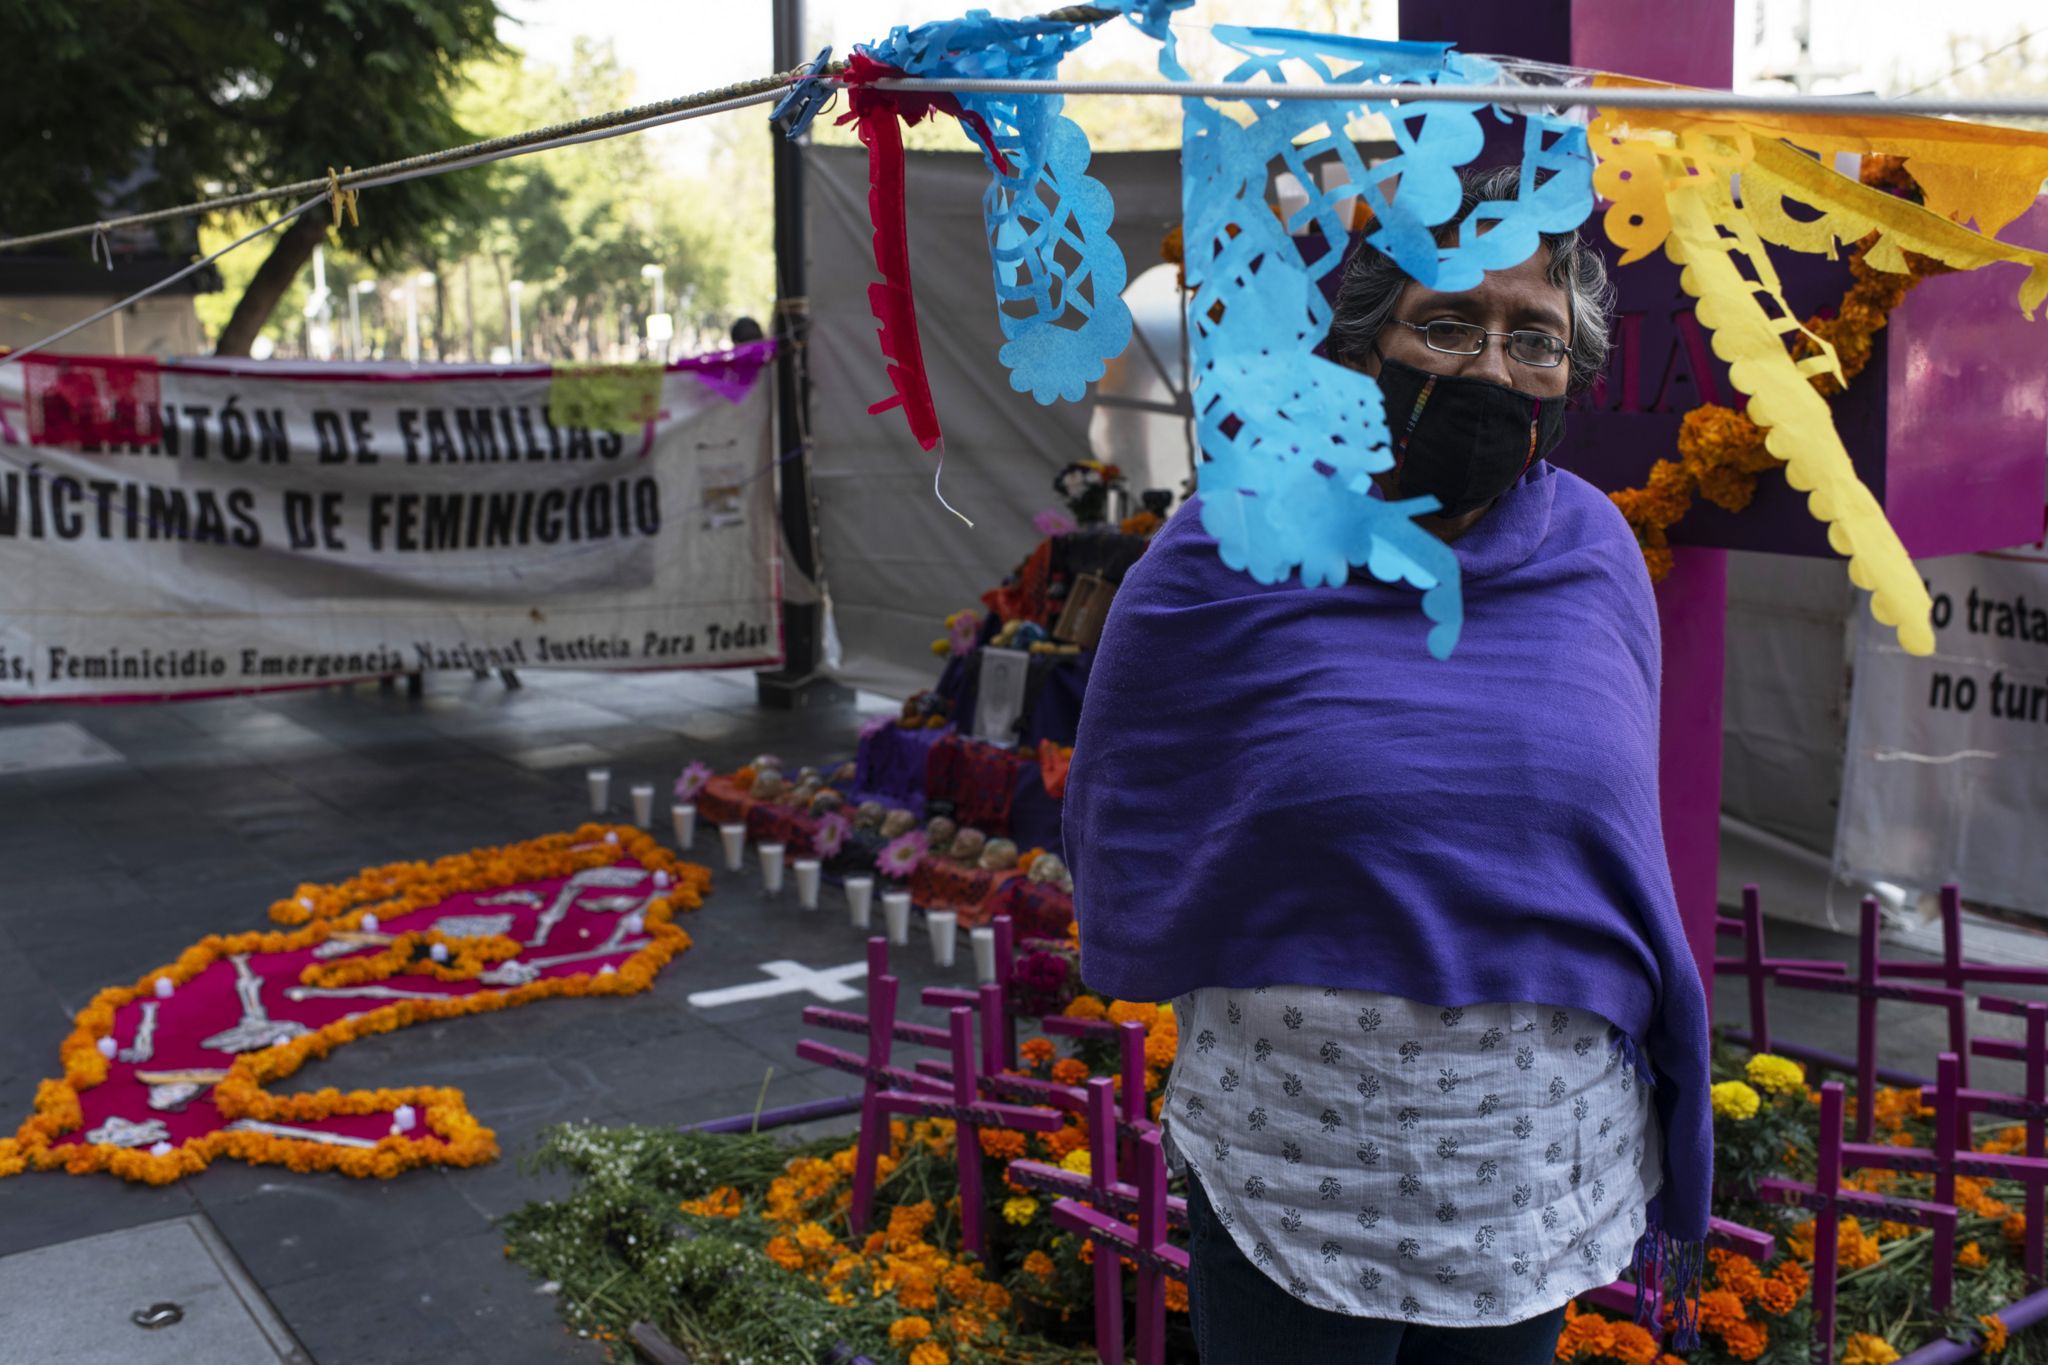 Alma Alvarado, from Jalapa, Veracruz, is in Mexico City supporting the feminist movement and the sit-in that takes place at the anti-femicide monument